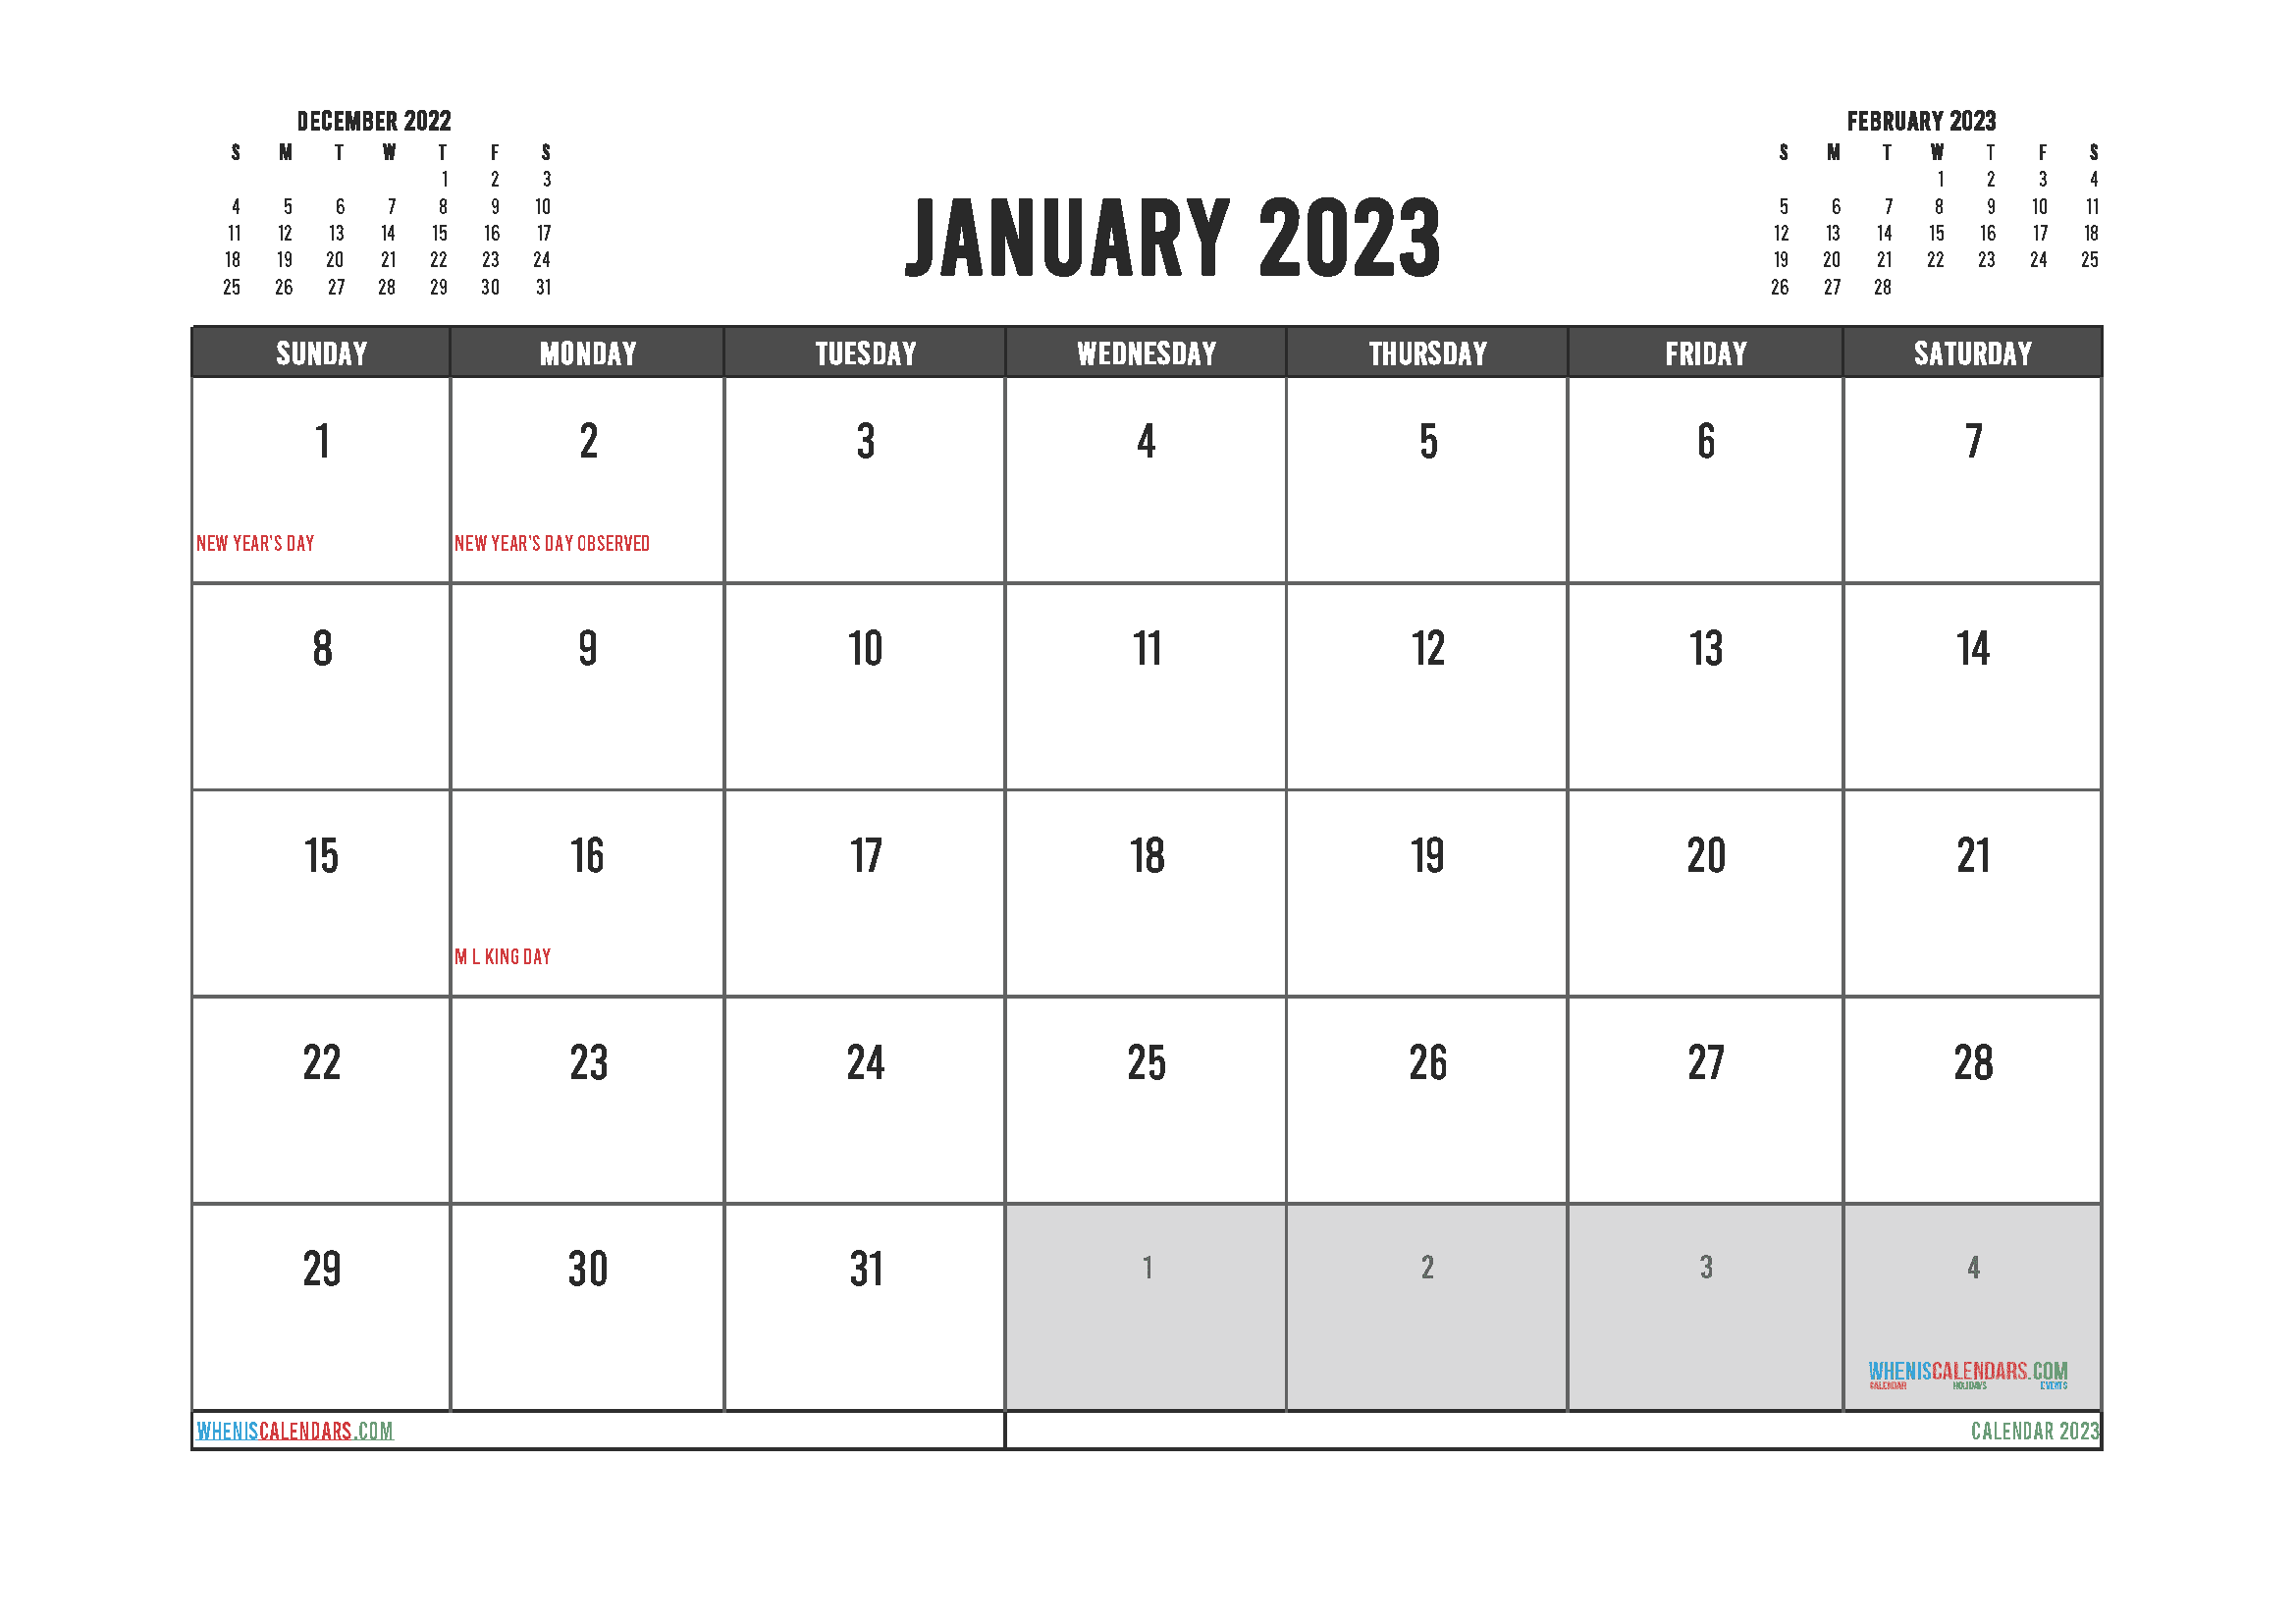 Free Calendar 2023 January with Holidays PDF in Landscape